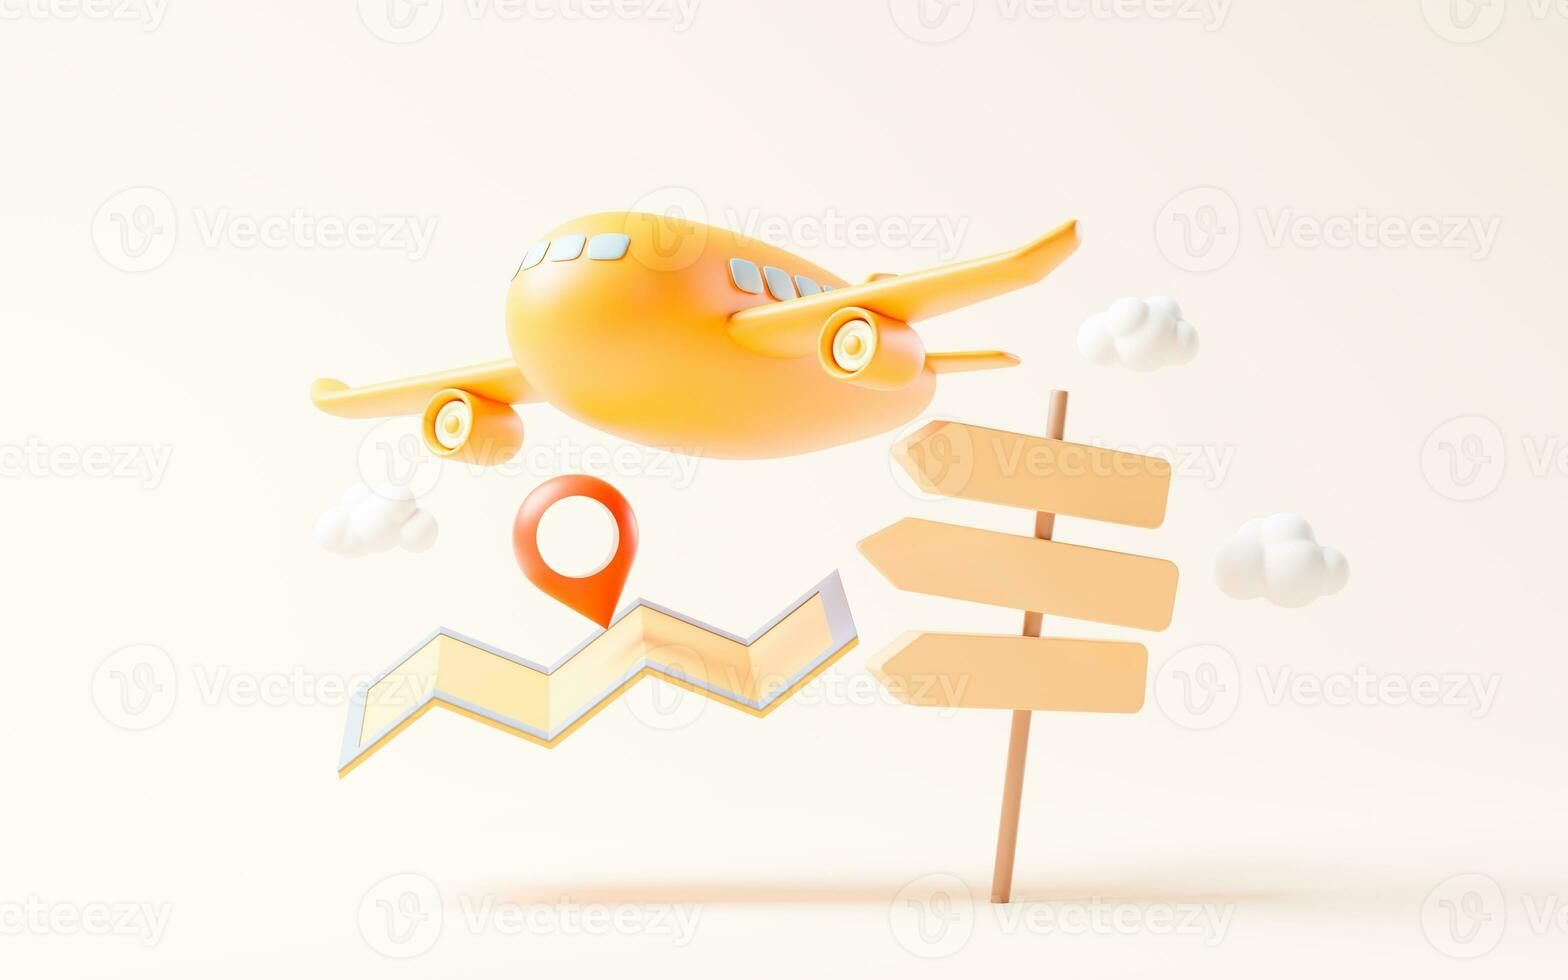 Airplane with cartoon style, 3d rendering. photo